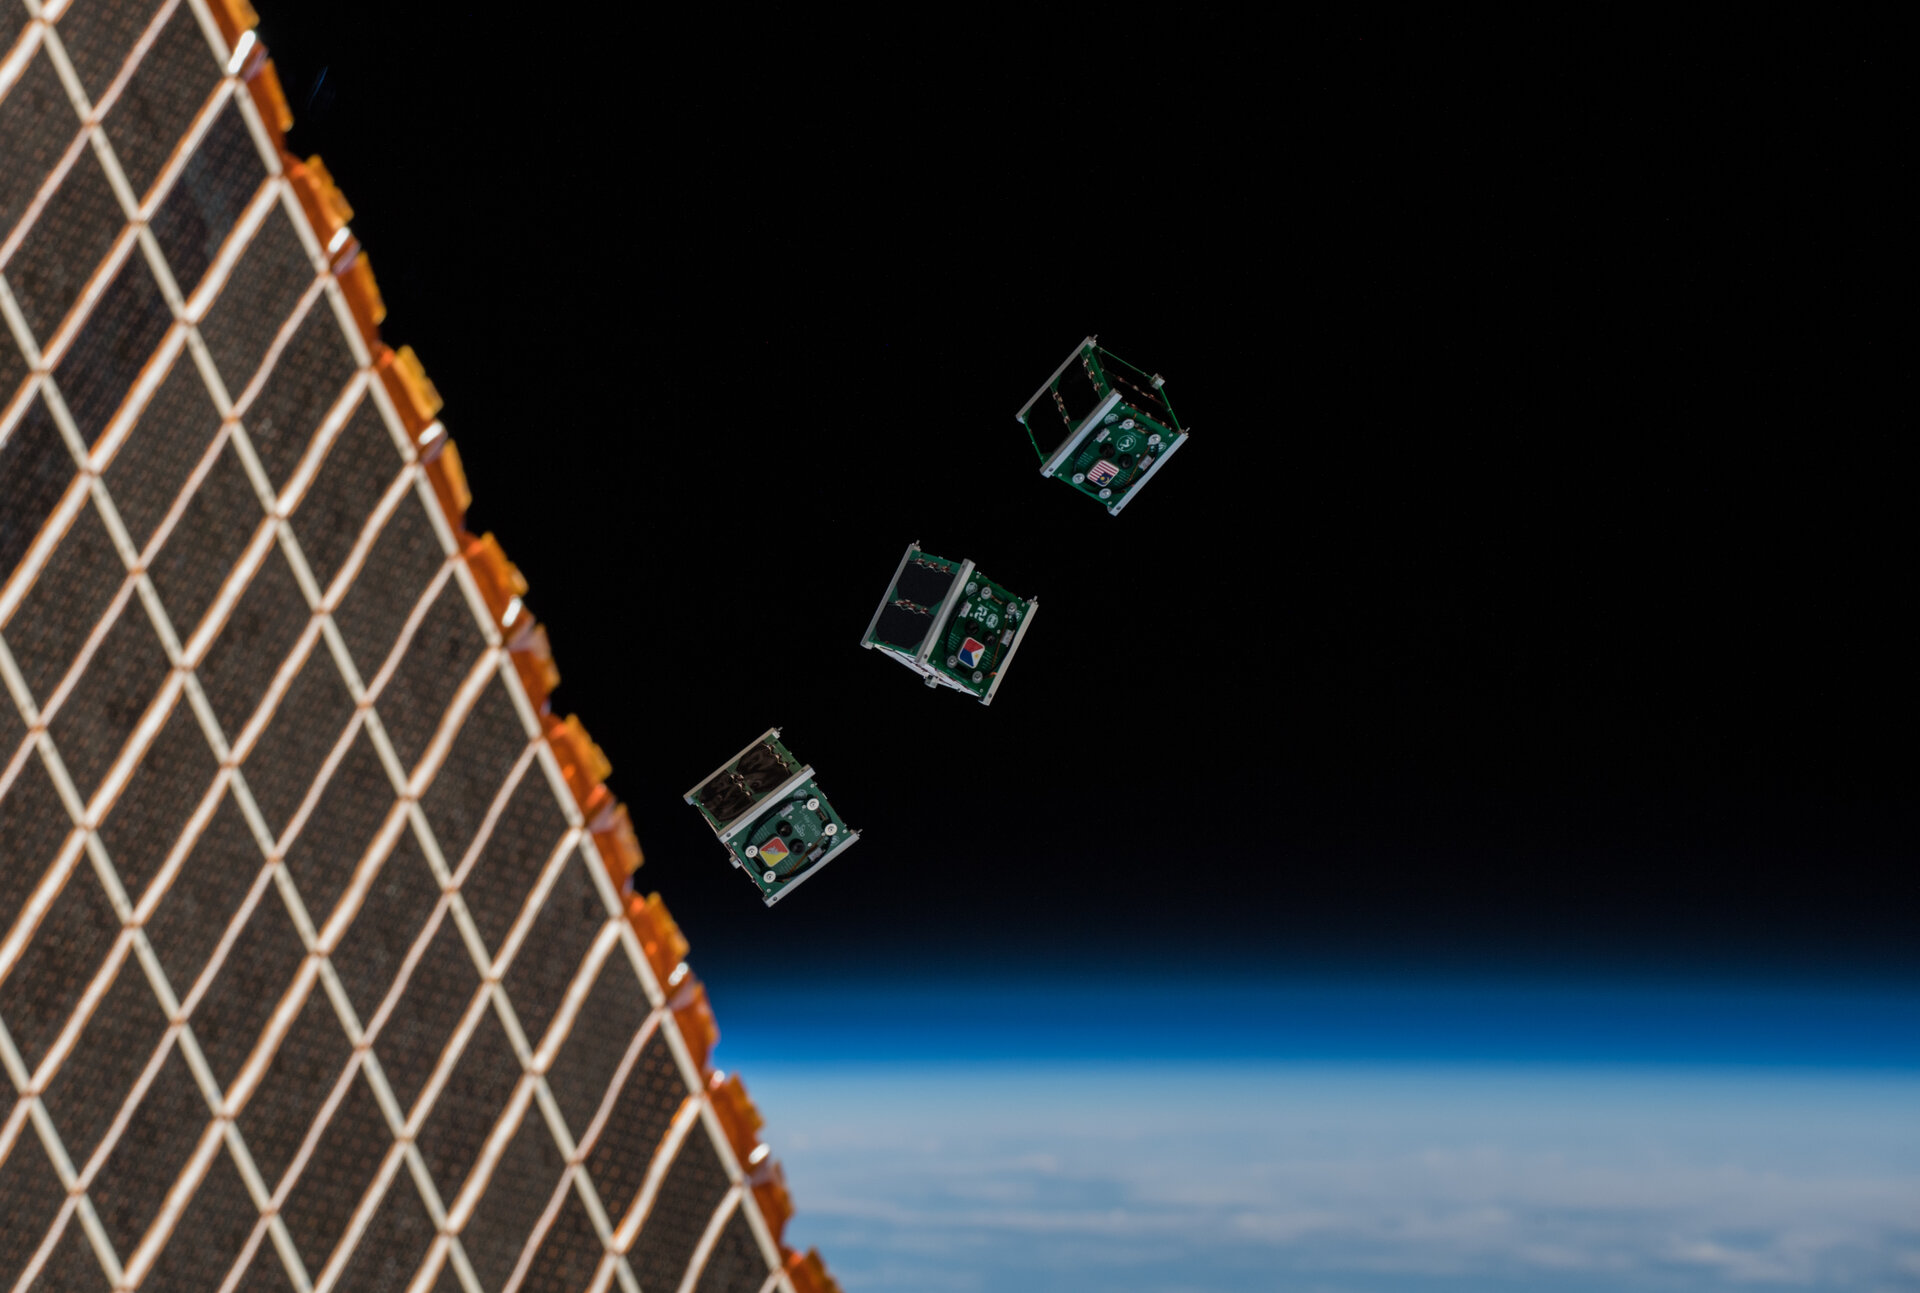 International CubeSats launched from the Space Station